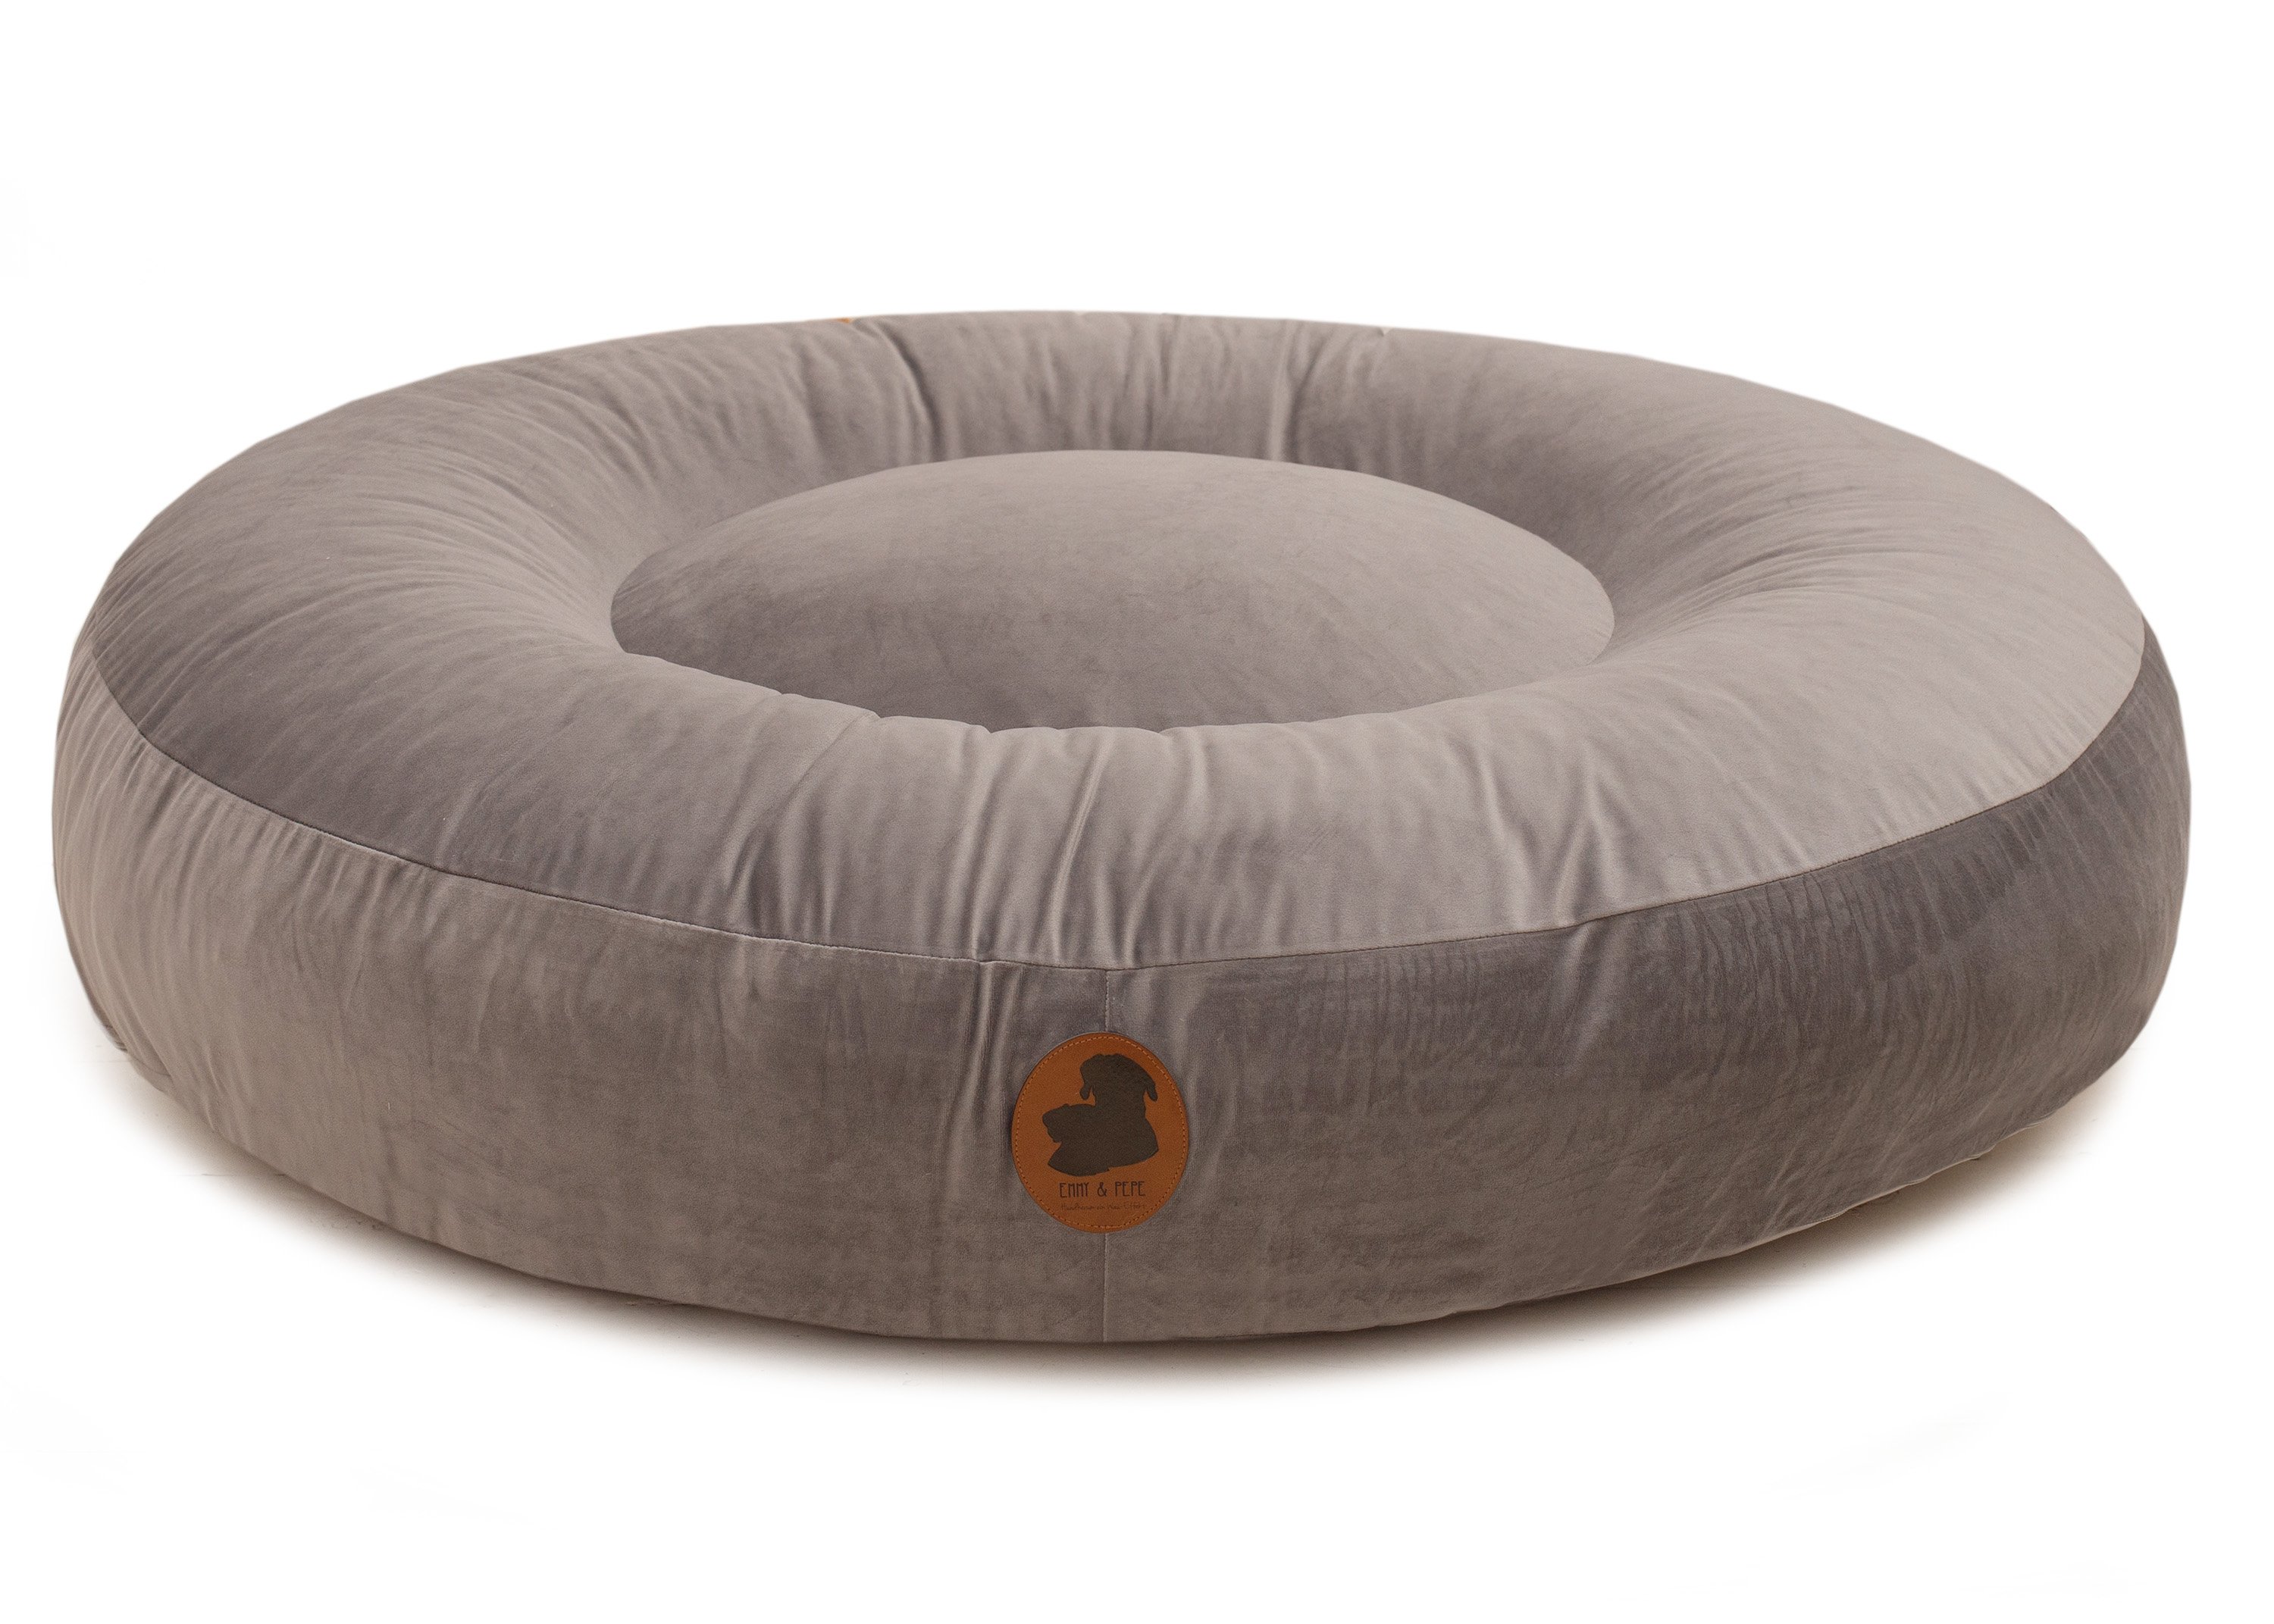 Wau-Bed Pets Friendly Taupe Oval-S (80x60cm)